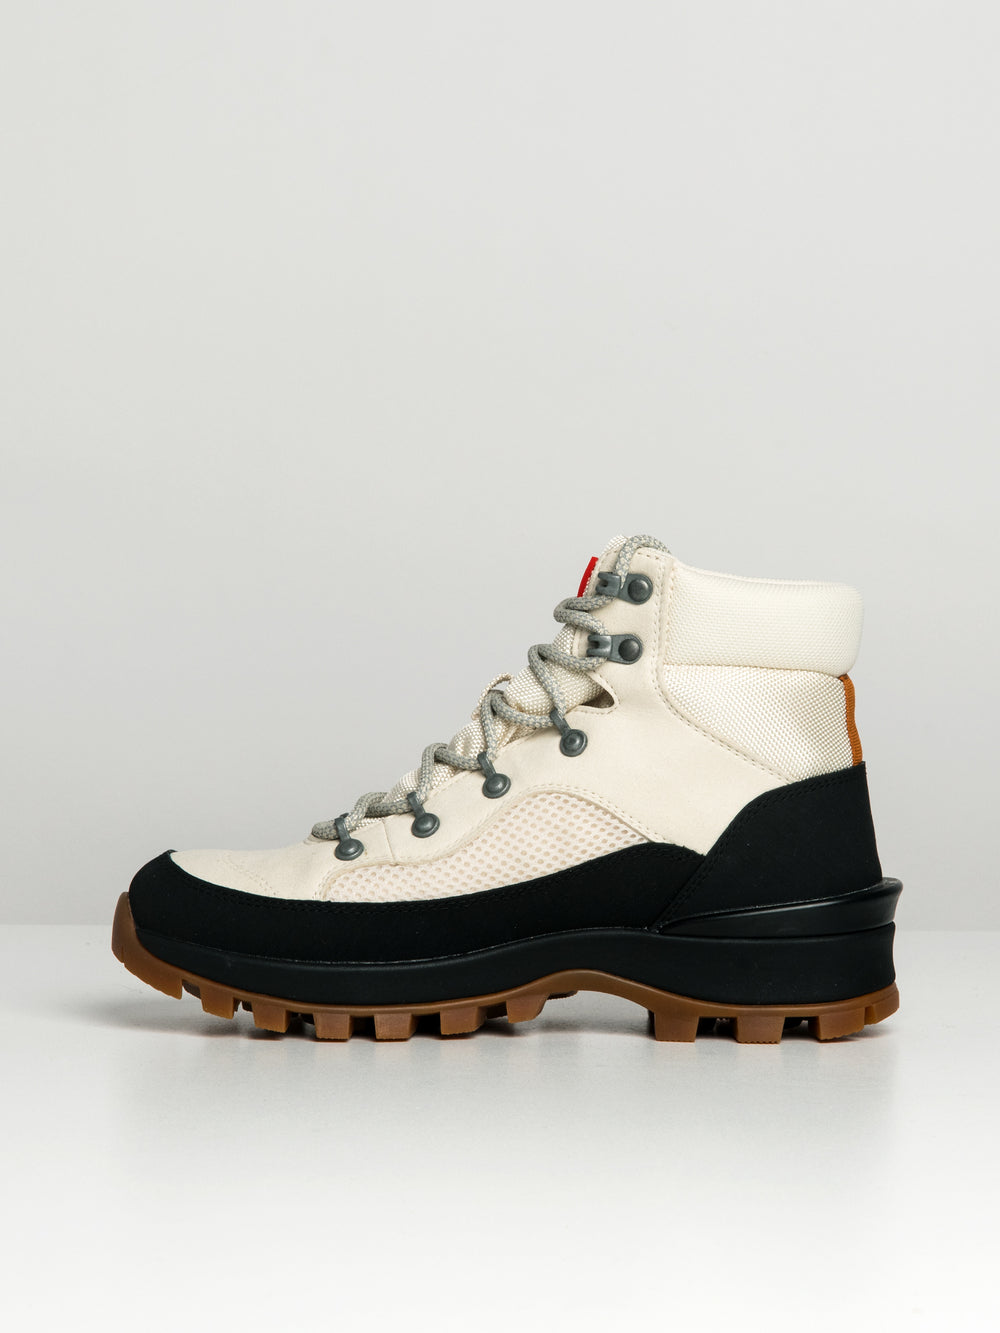 WOMENS HUNTER EXPLORER MID LACE BOOT